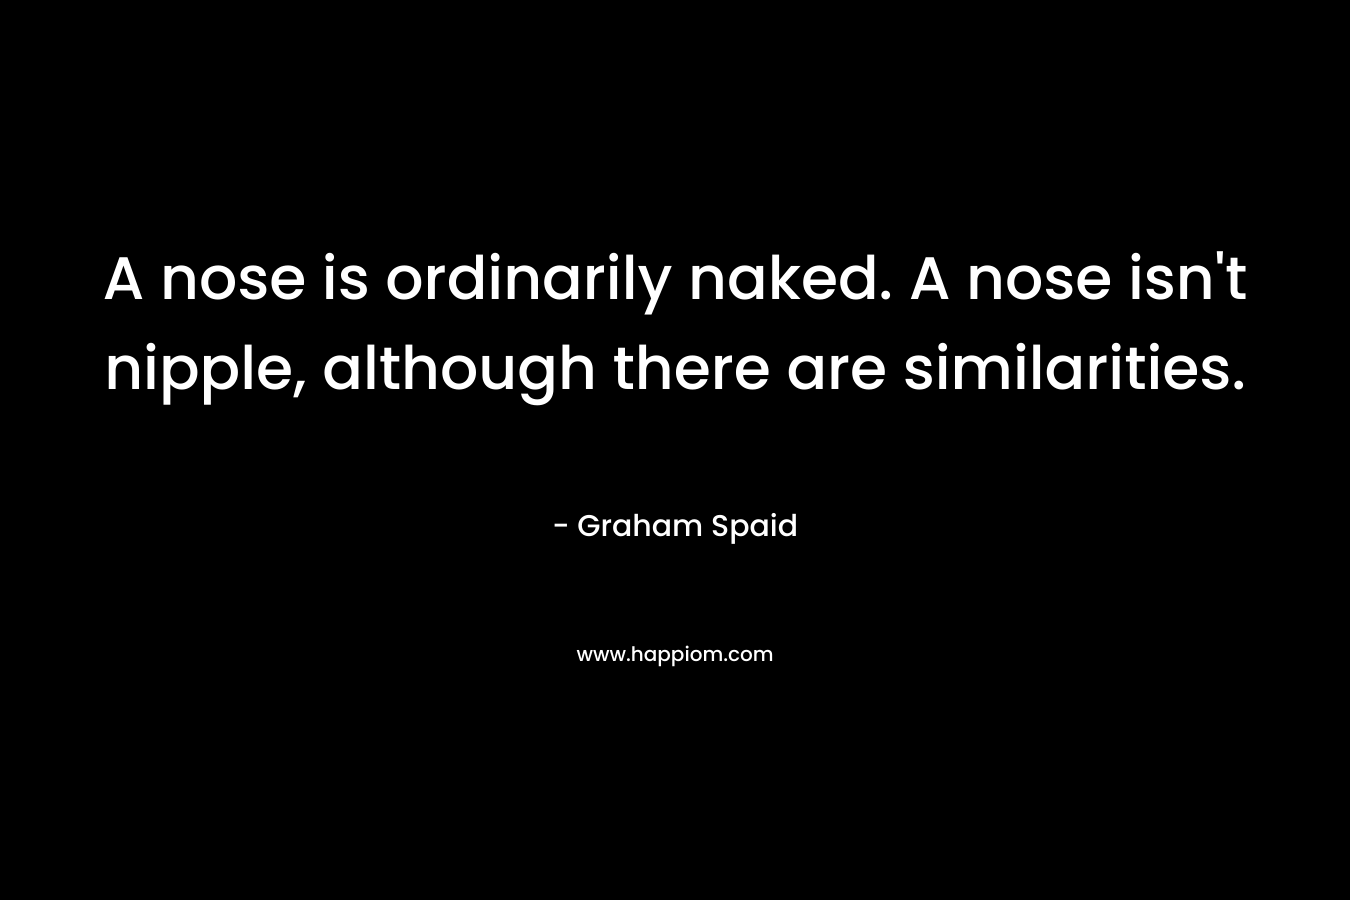 A nose is ordinarily naked. A nose isn’t nipple, although there are similarities. – Graham Spaid